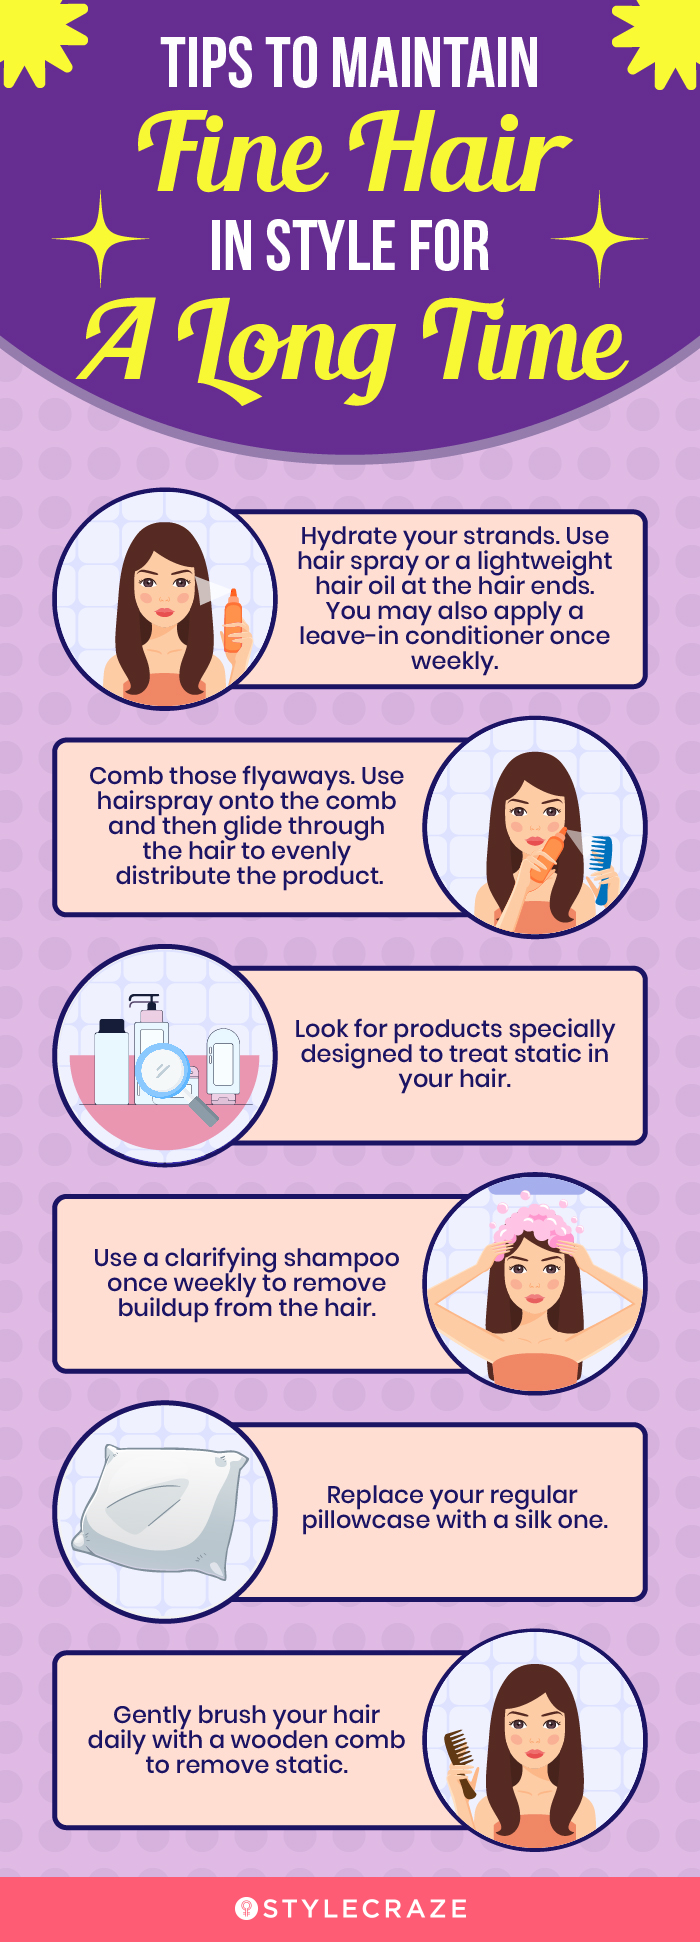 Tips To Maintain Fine Hair In Style For A Long Time [infographic]